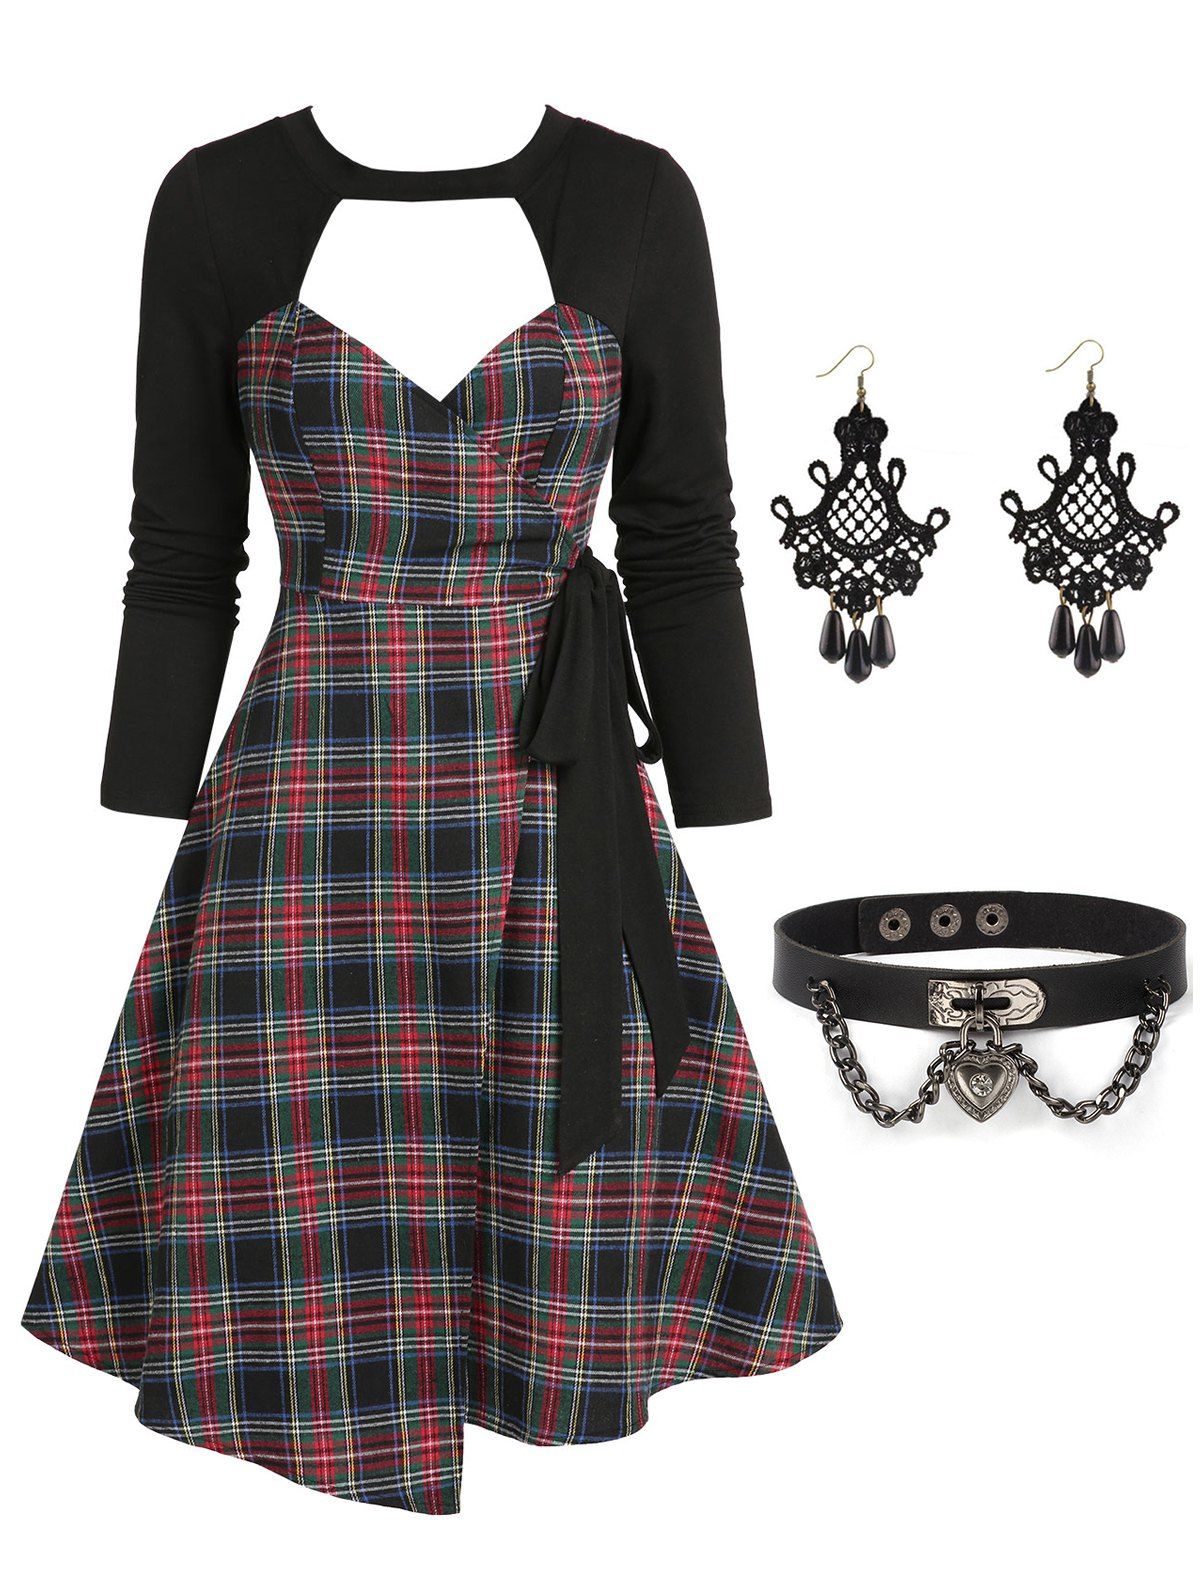 Cut Out Plaid Wrap Mini Dress And Chain Heart Faux Leather Choker Hollow Out Lace Beads Earrings Casual Outfit - BLACK S